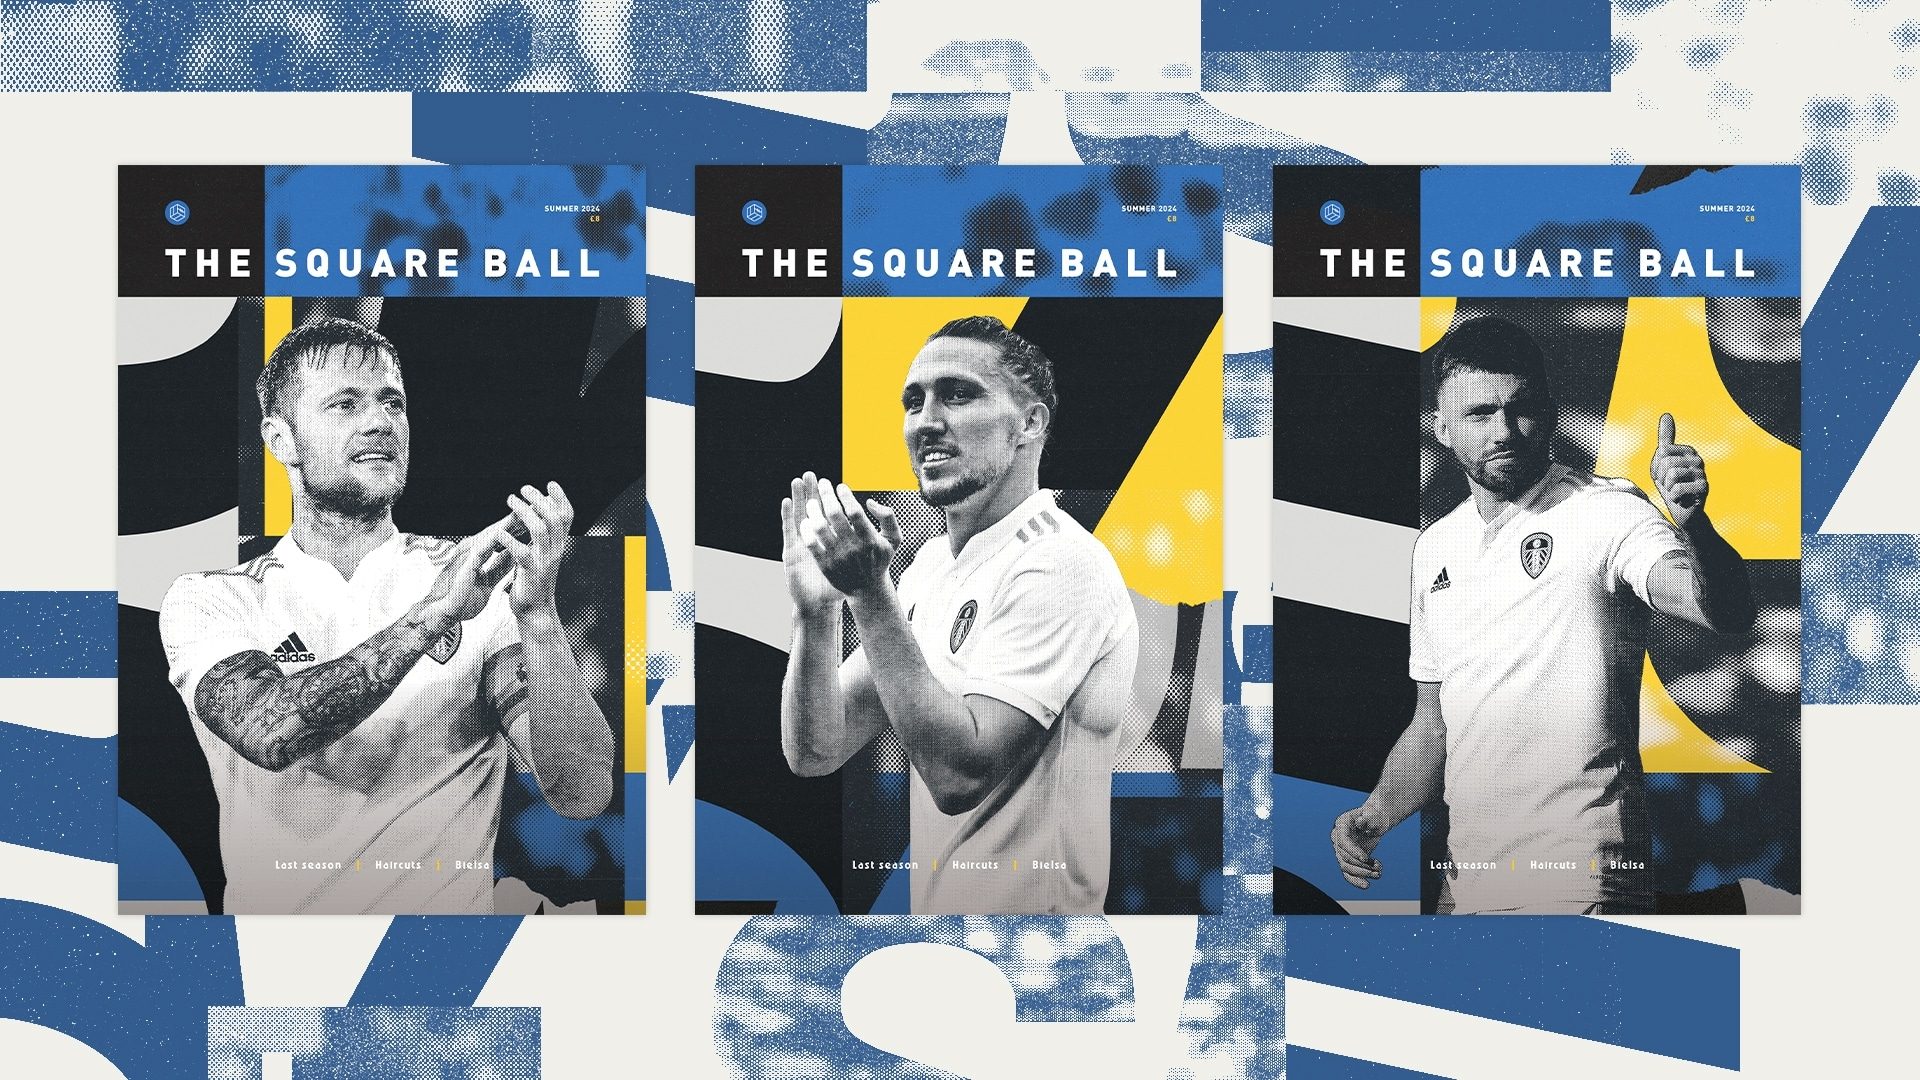 A composite image of all three available covers of the TSB Summer Special 2024, featuring Liam Cooper, Luke Ayling or Stuart Dallas